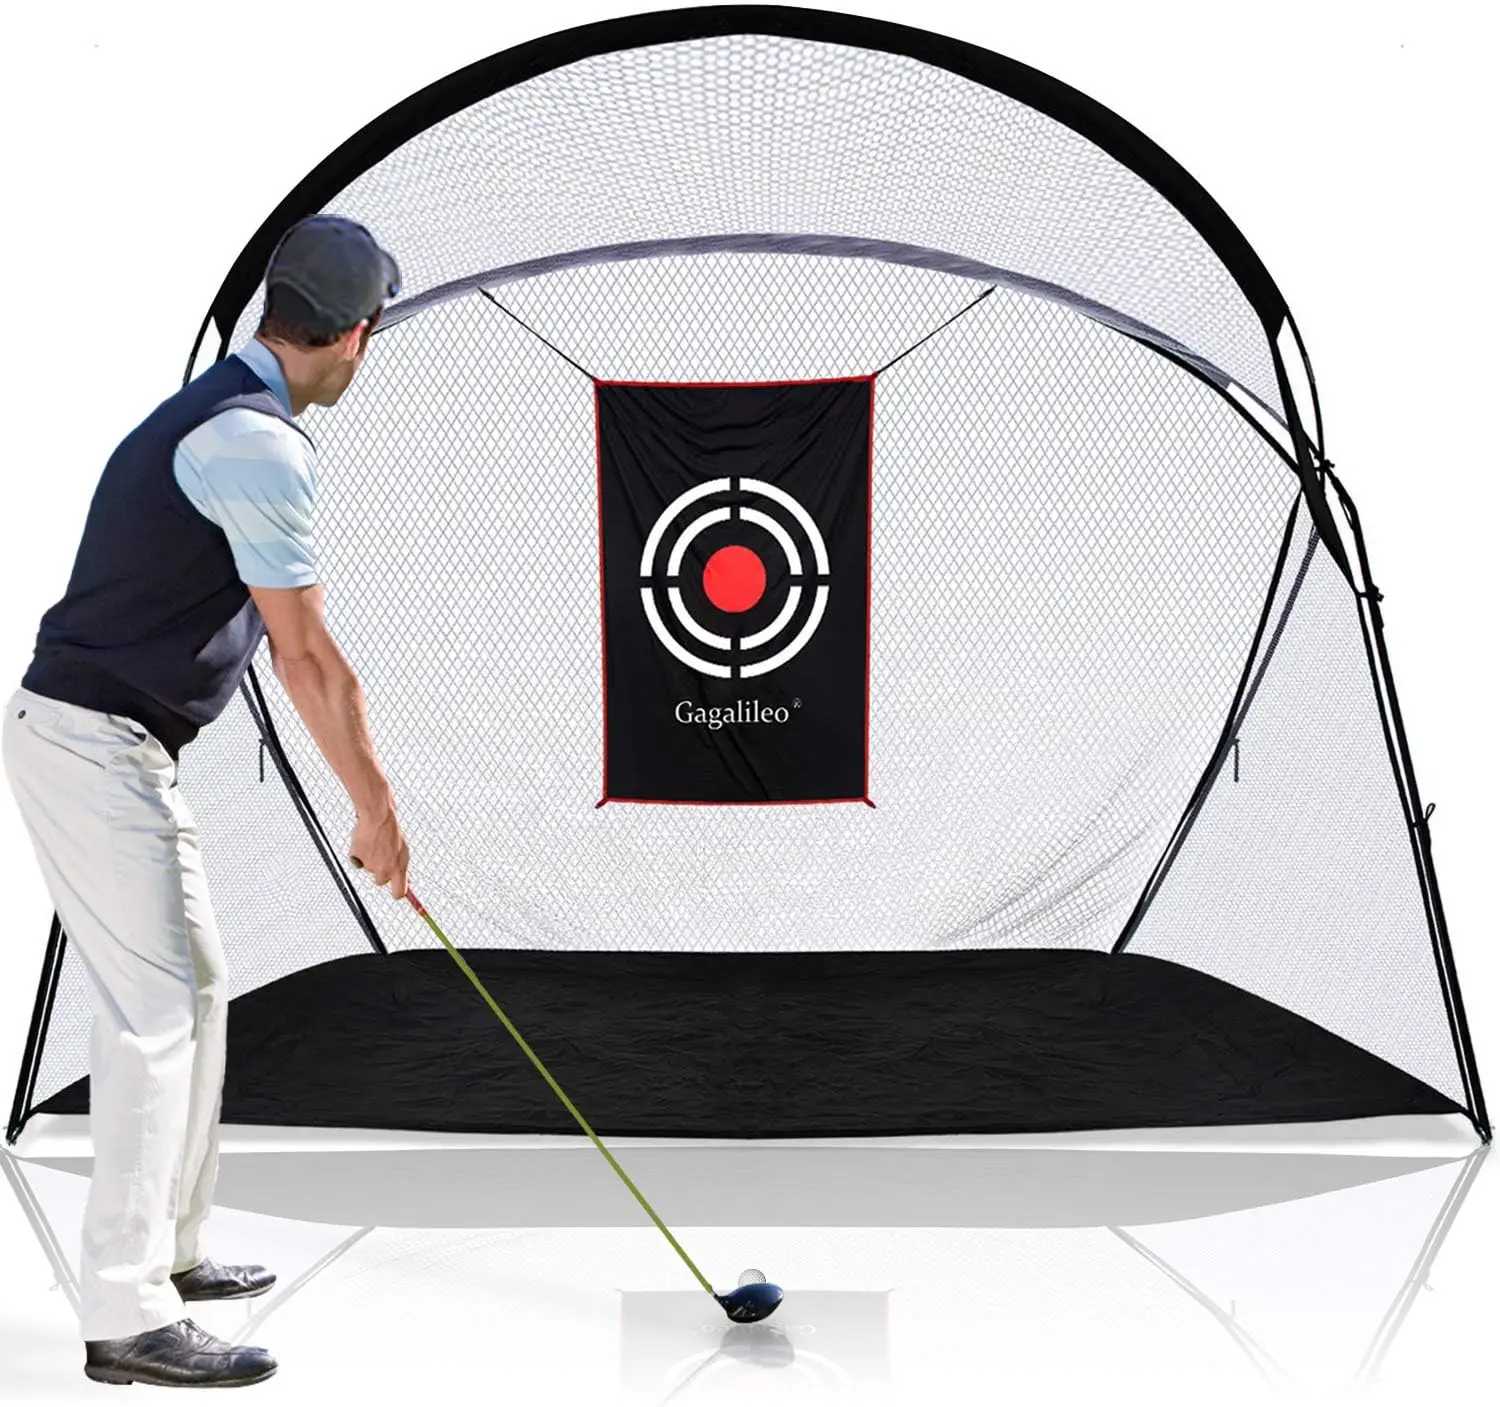 

Duty Golf Hitting Net Golf Practice Nets Golf Driving Range for Outdoor Indoor with Target and Carry Bag 10(L) x7(H) x5.5(W) FT